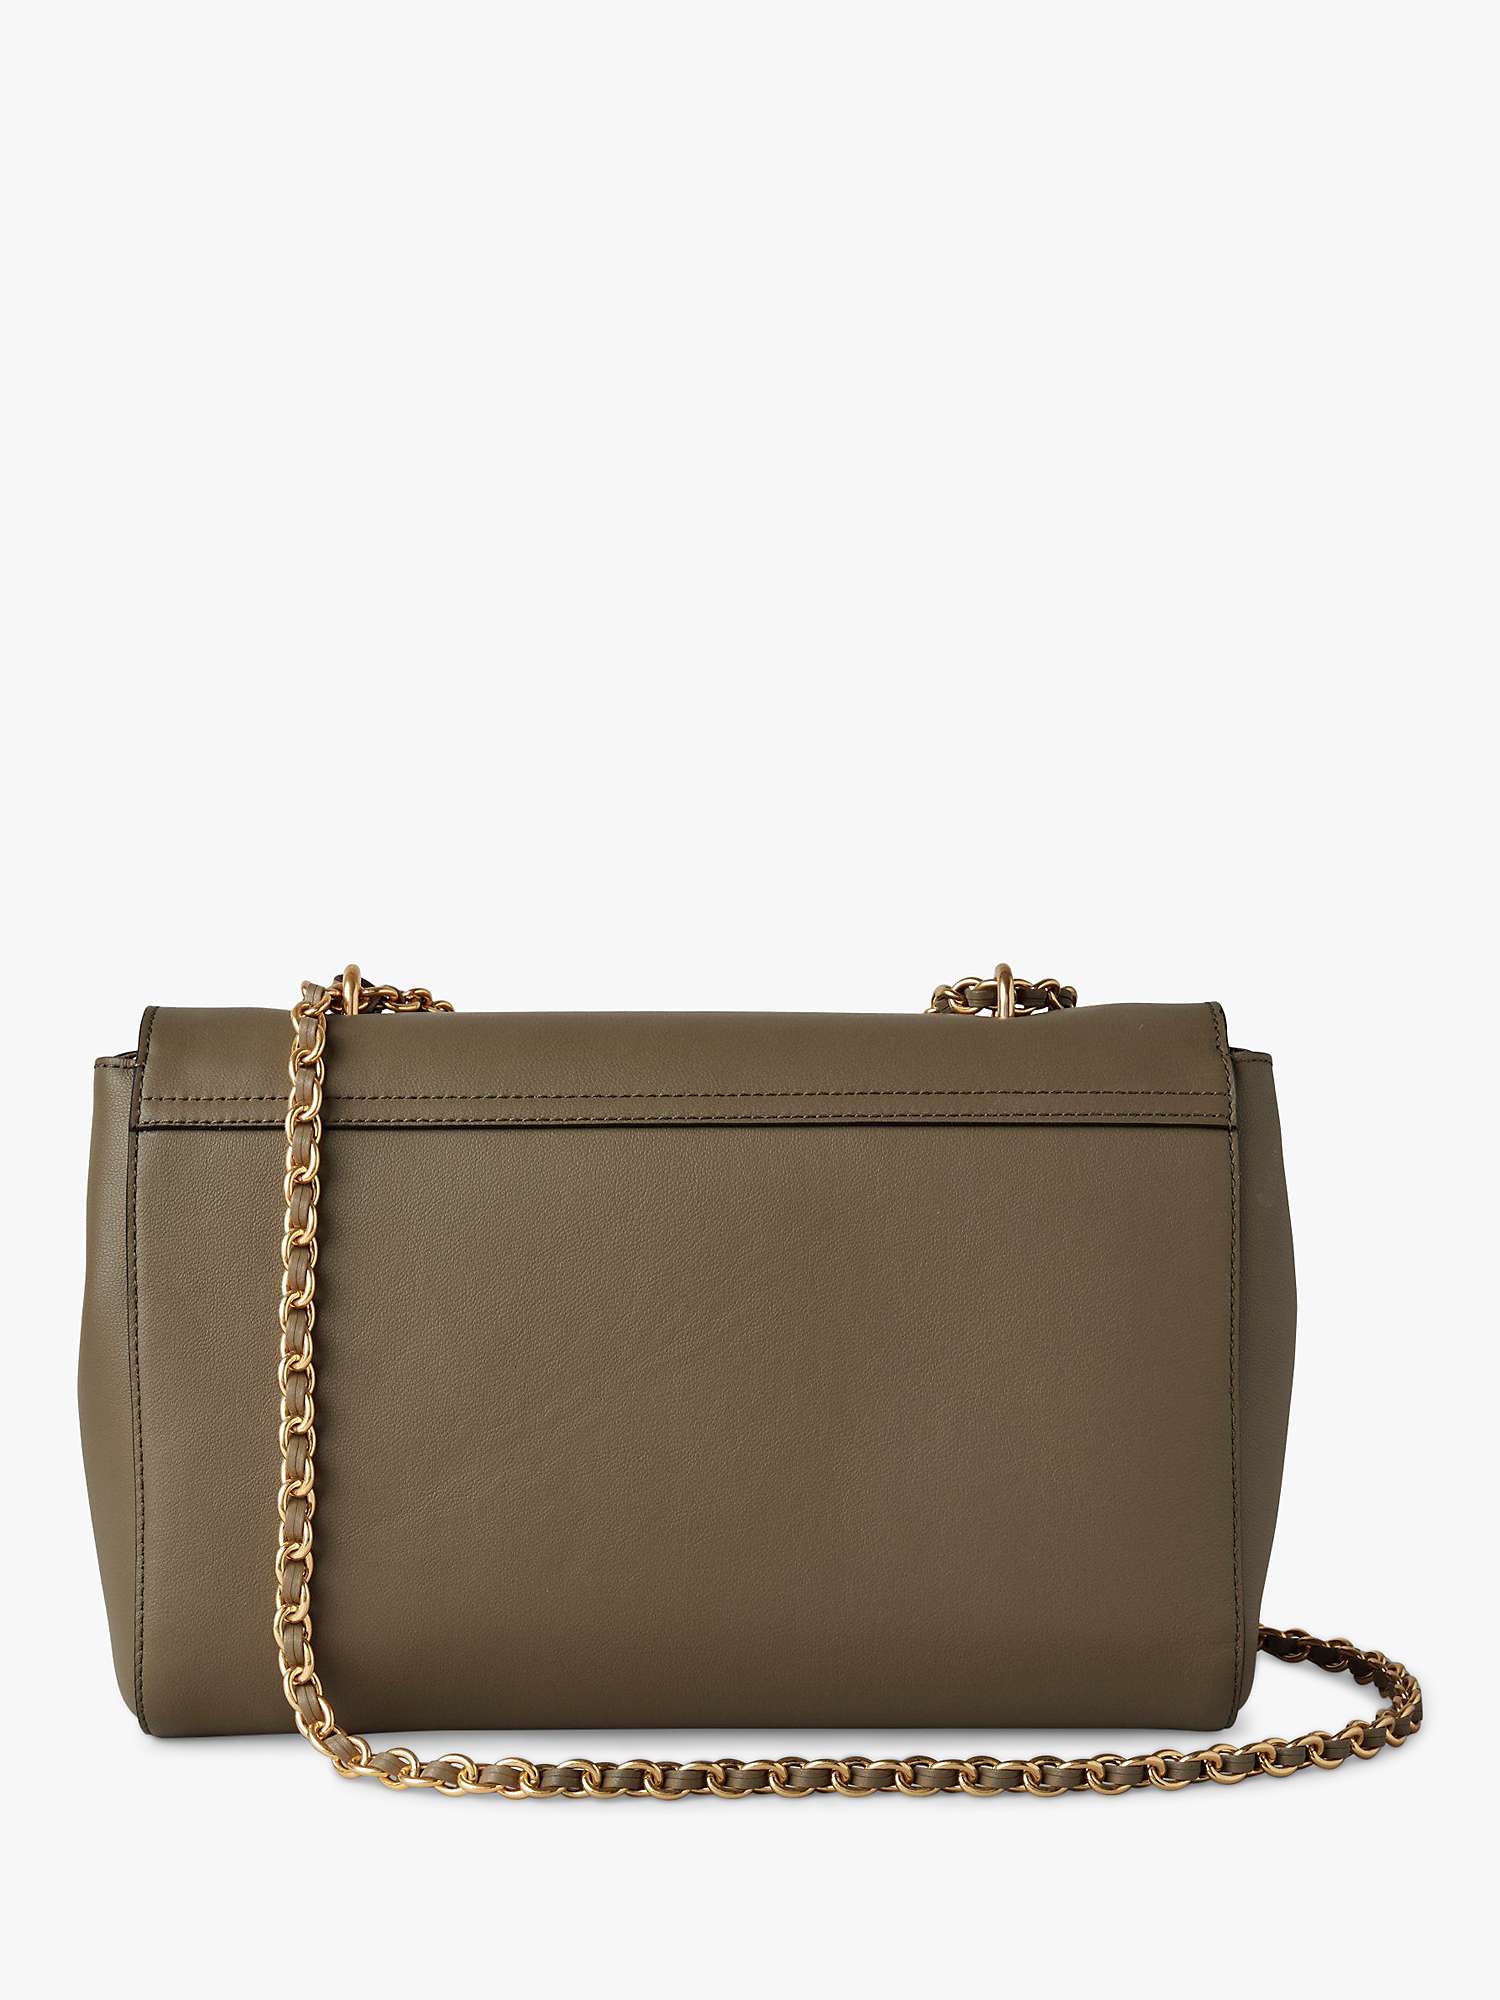 Buy Mulberry Medium Lily Micro Classic Grain Leather Shoulder Bag, Linen Green Online at johnlewis.com